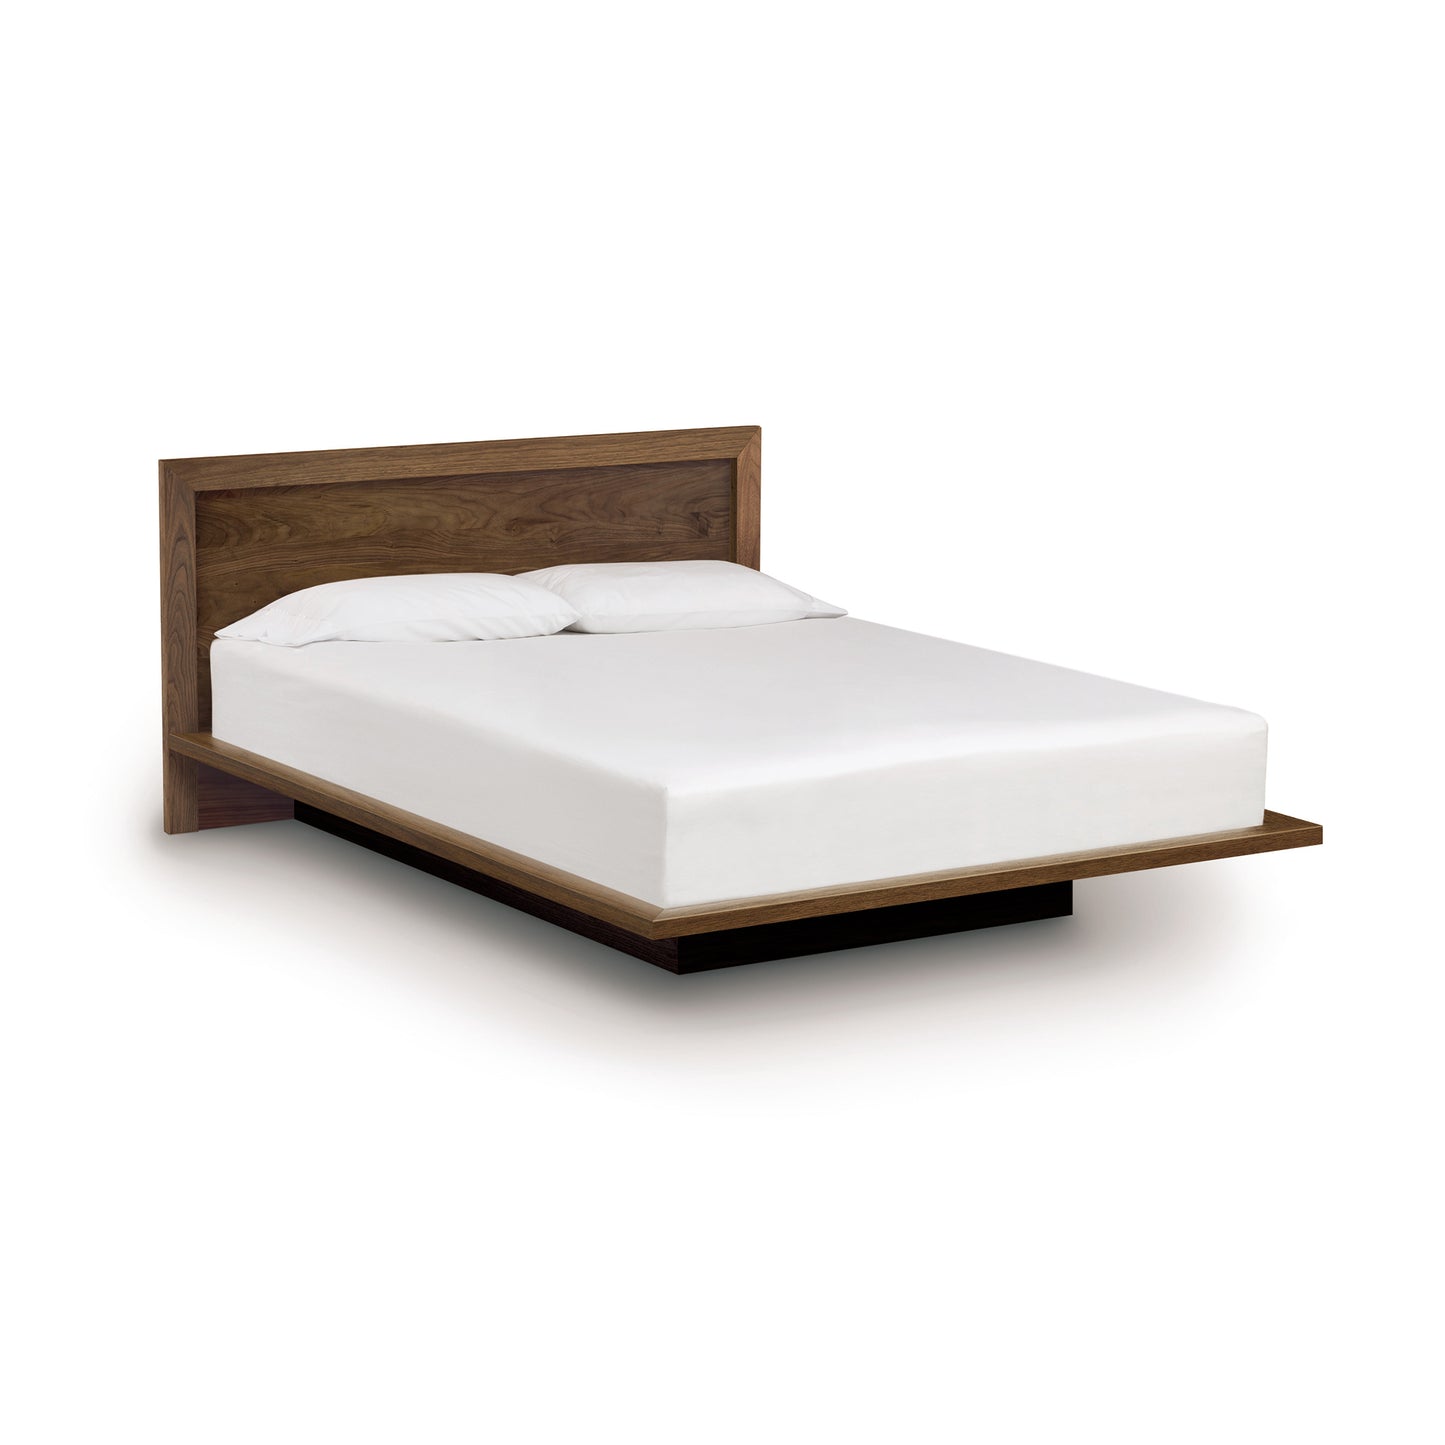 A Copeland Furniture Moduluxe Platform Bed with Panel Headboard - 35" Series in American black walnut hardwood, fitted with a white mattress and no bedding, isolated on a white background.